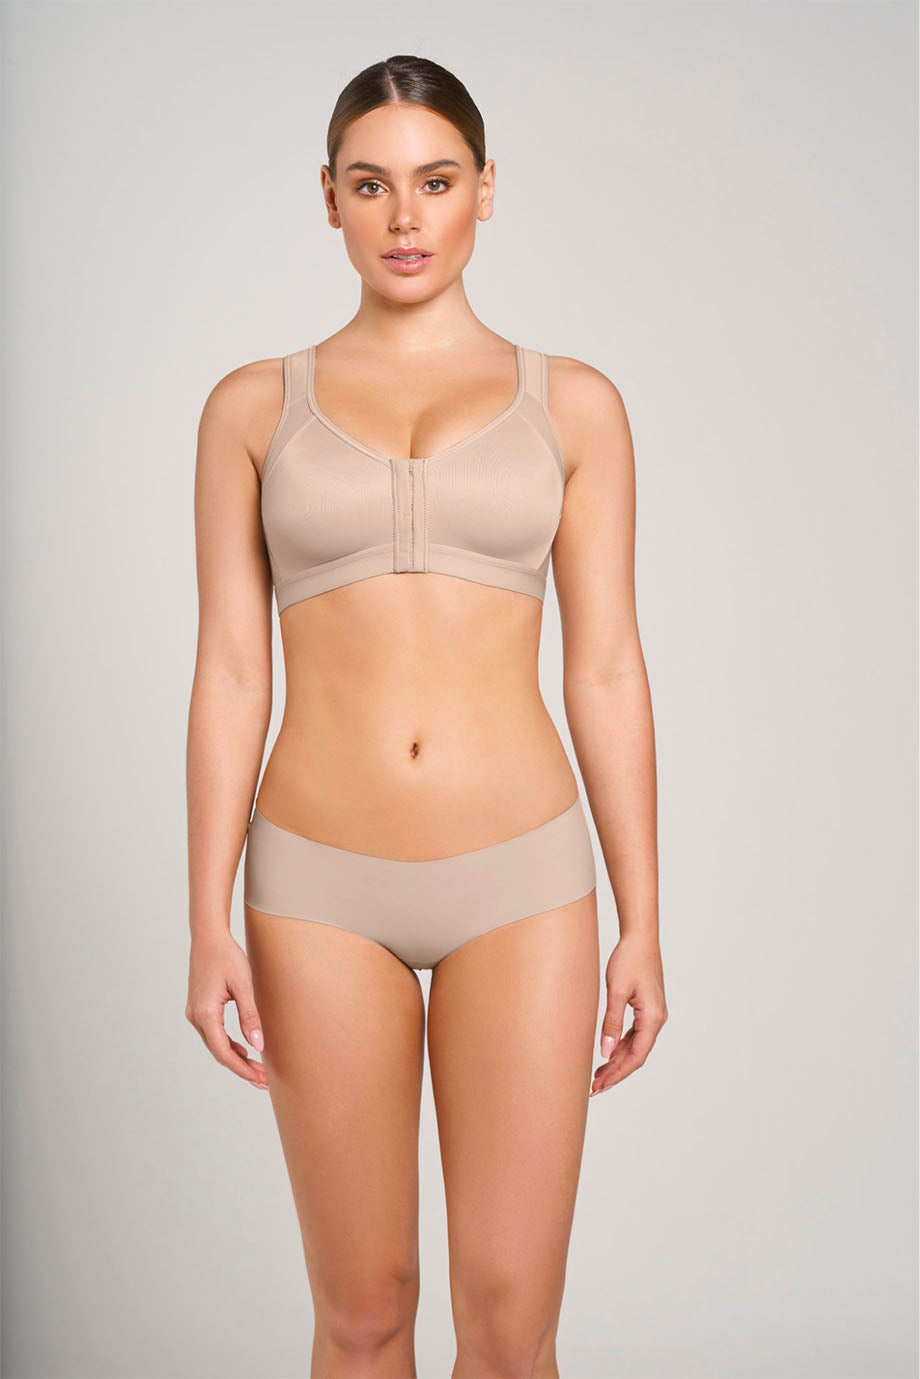 Post-Op Bra After Breast Enlargement or Reduction - China Medical